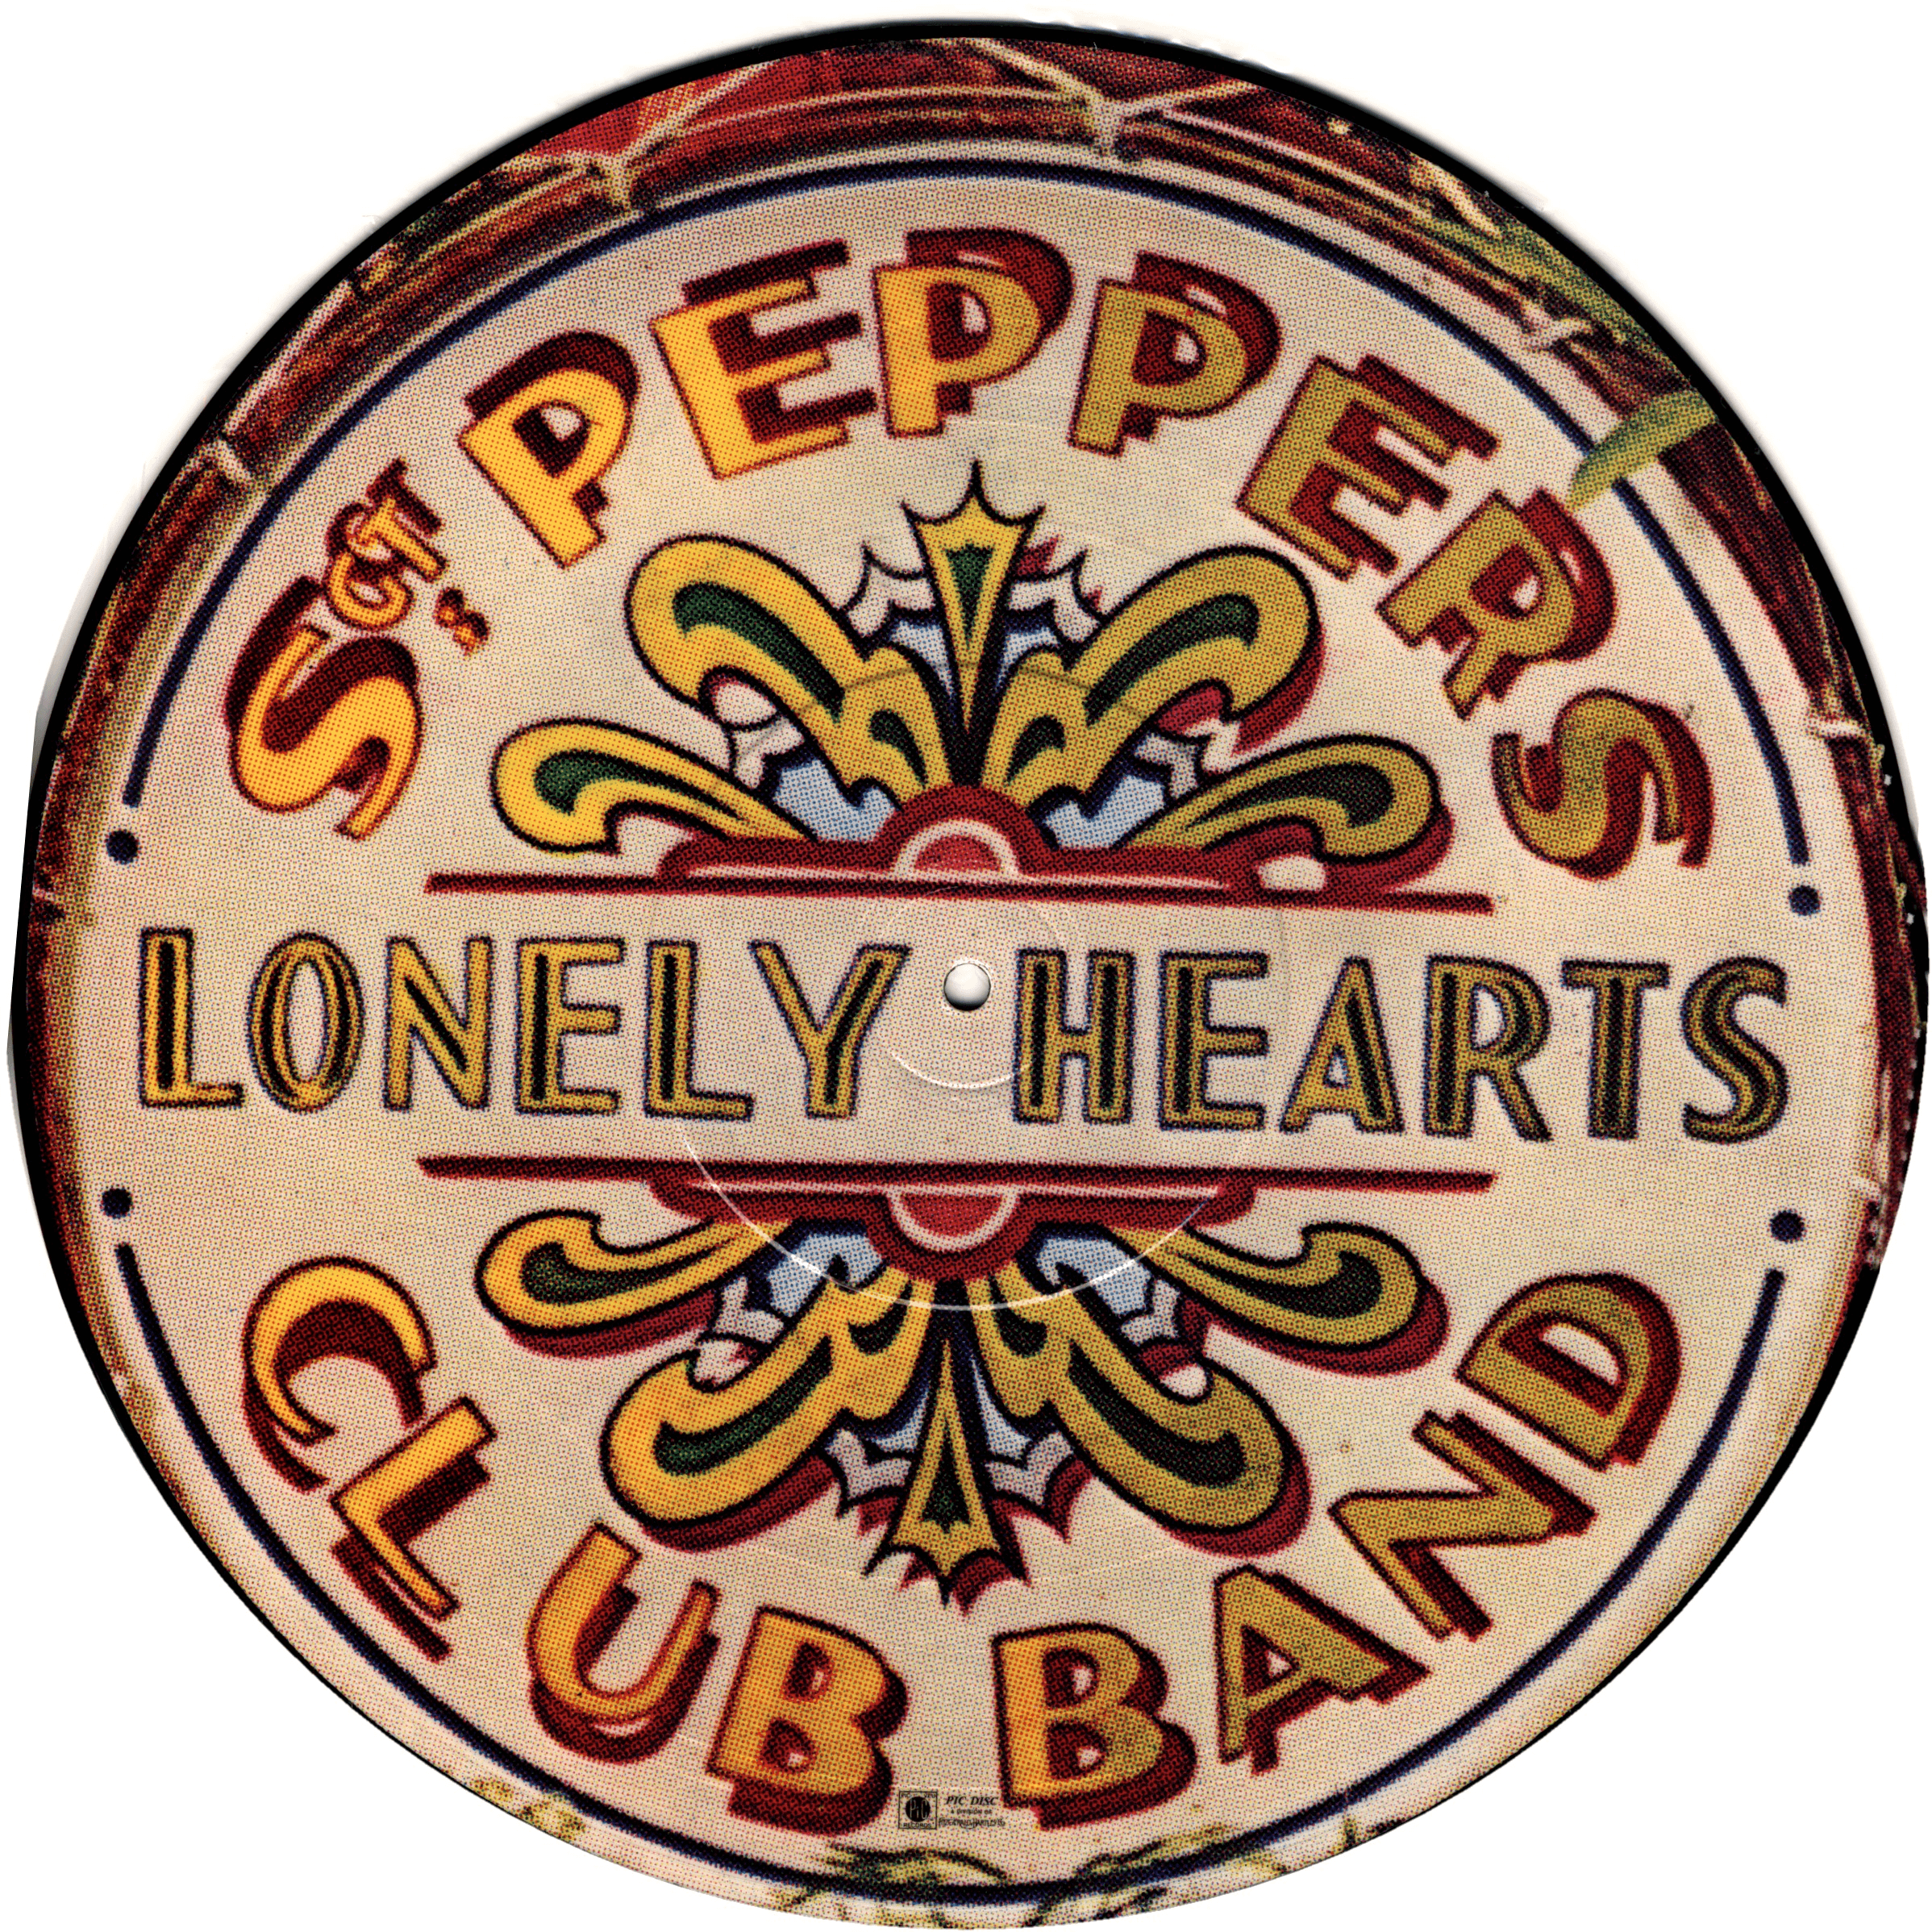 Heart Classic Rock Band Logo - The Beatles: Sgt. Pepper's Lonely Hearts Club Band picture disk